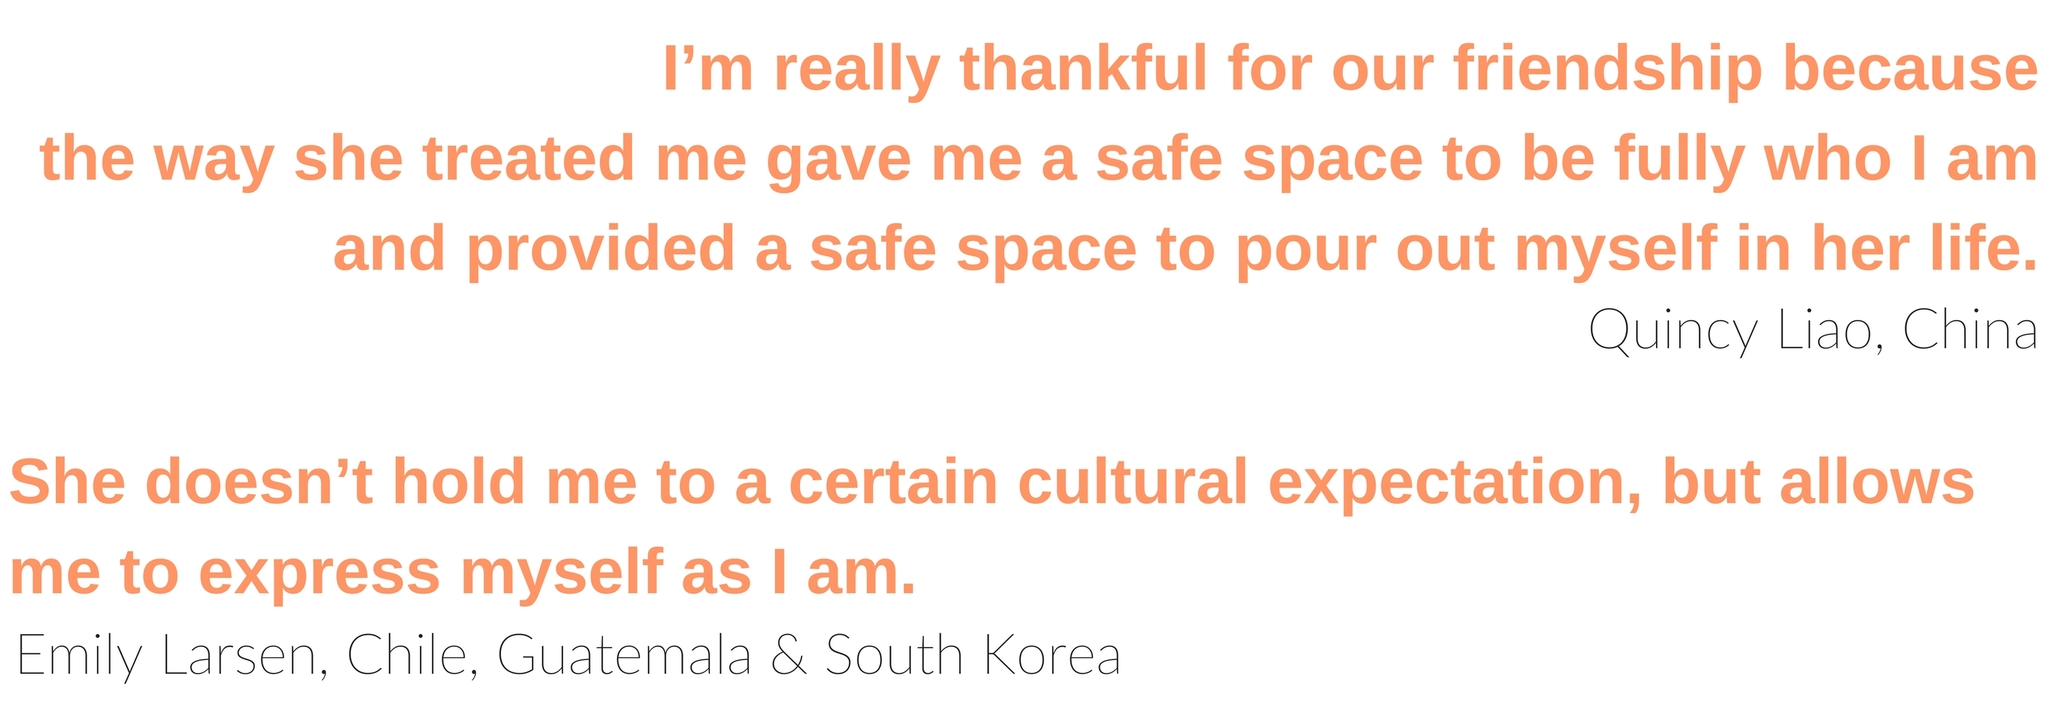 “I’m really thankful for our friendship because the way she treated me gave me a safe space to be fully who I am and provided a safe space to pour out myself in her life.” ~ Quincy Liao, China “She doesn’t hold me to a certain cultural expectation, but allows me to express myself as I am.” ~Emily Larsen, Chile, Guatemala, South Korea